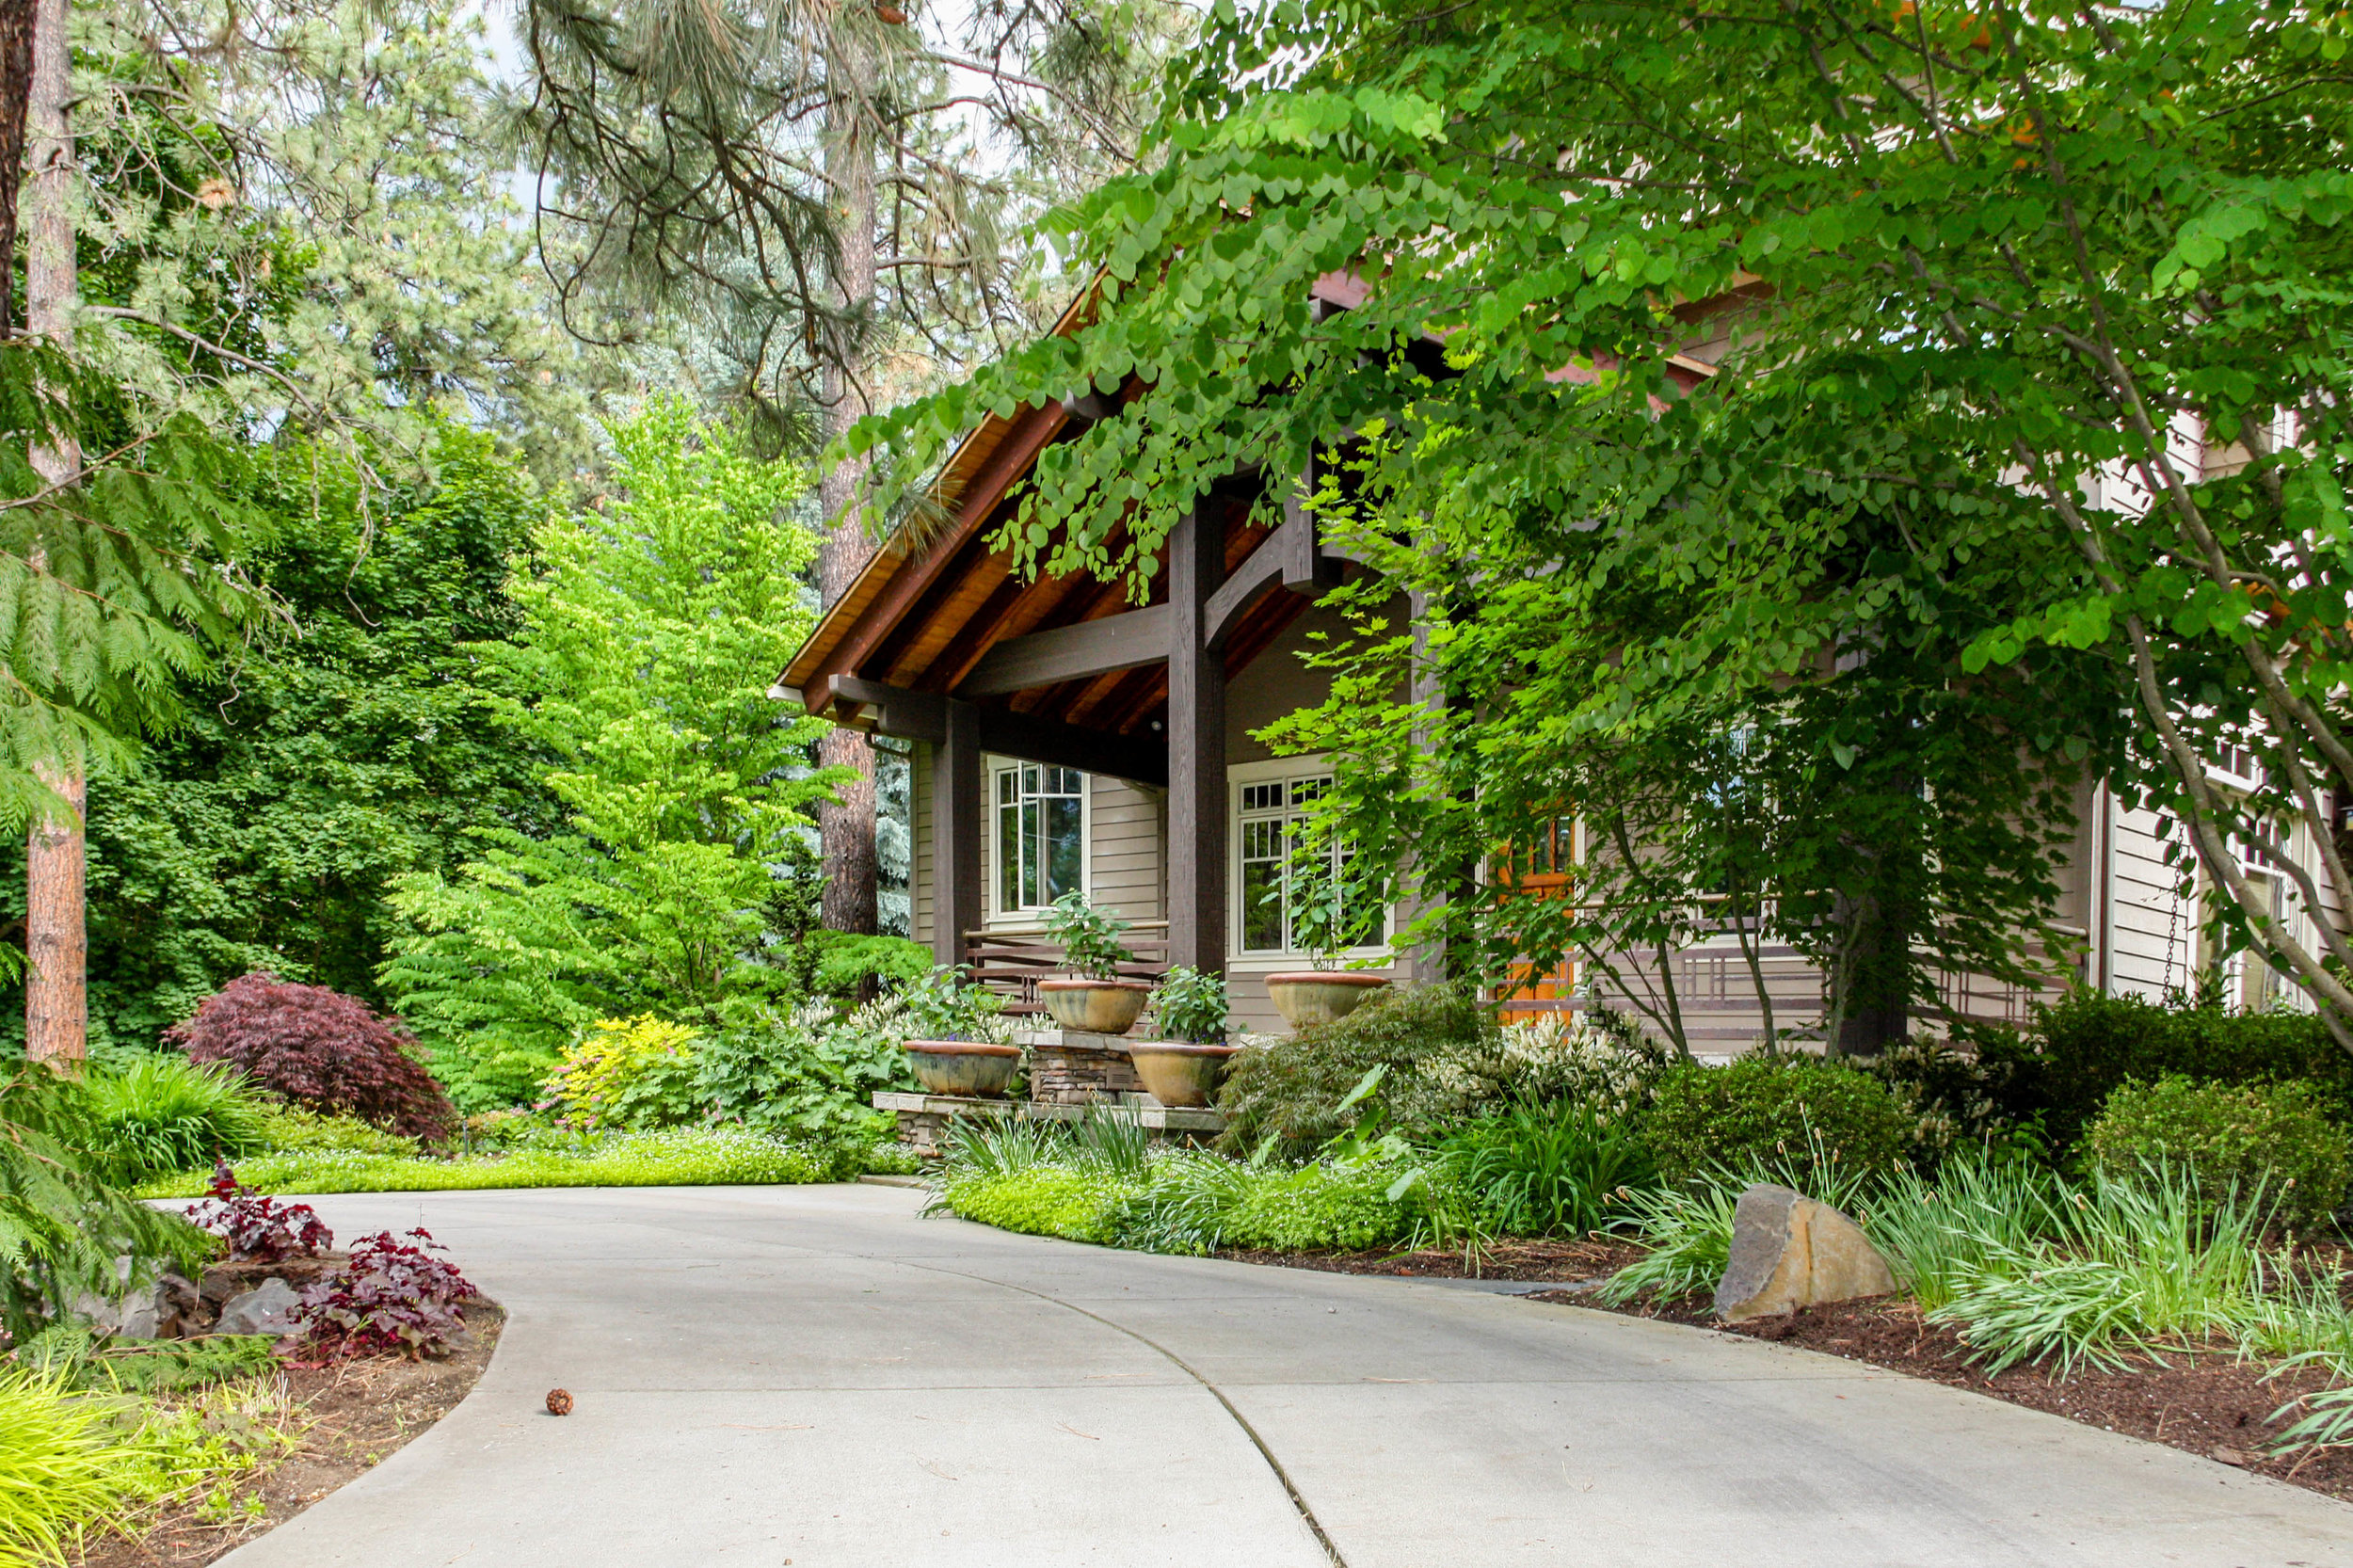 spokane craftsman porch and landscaping with circle driveway